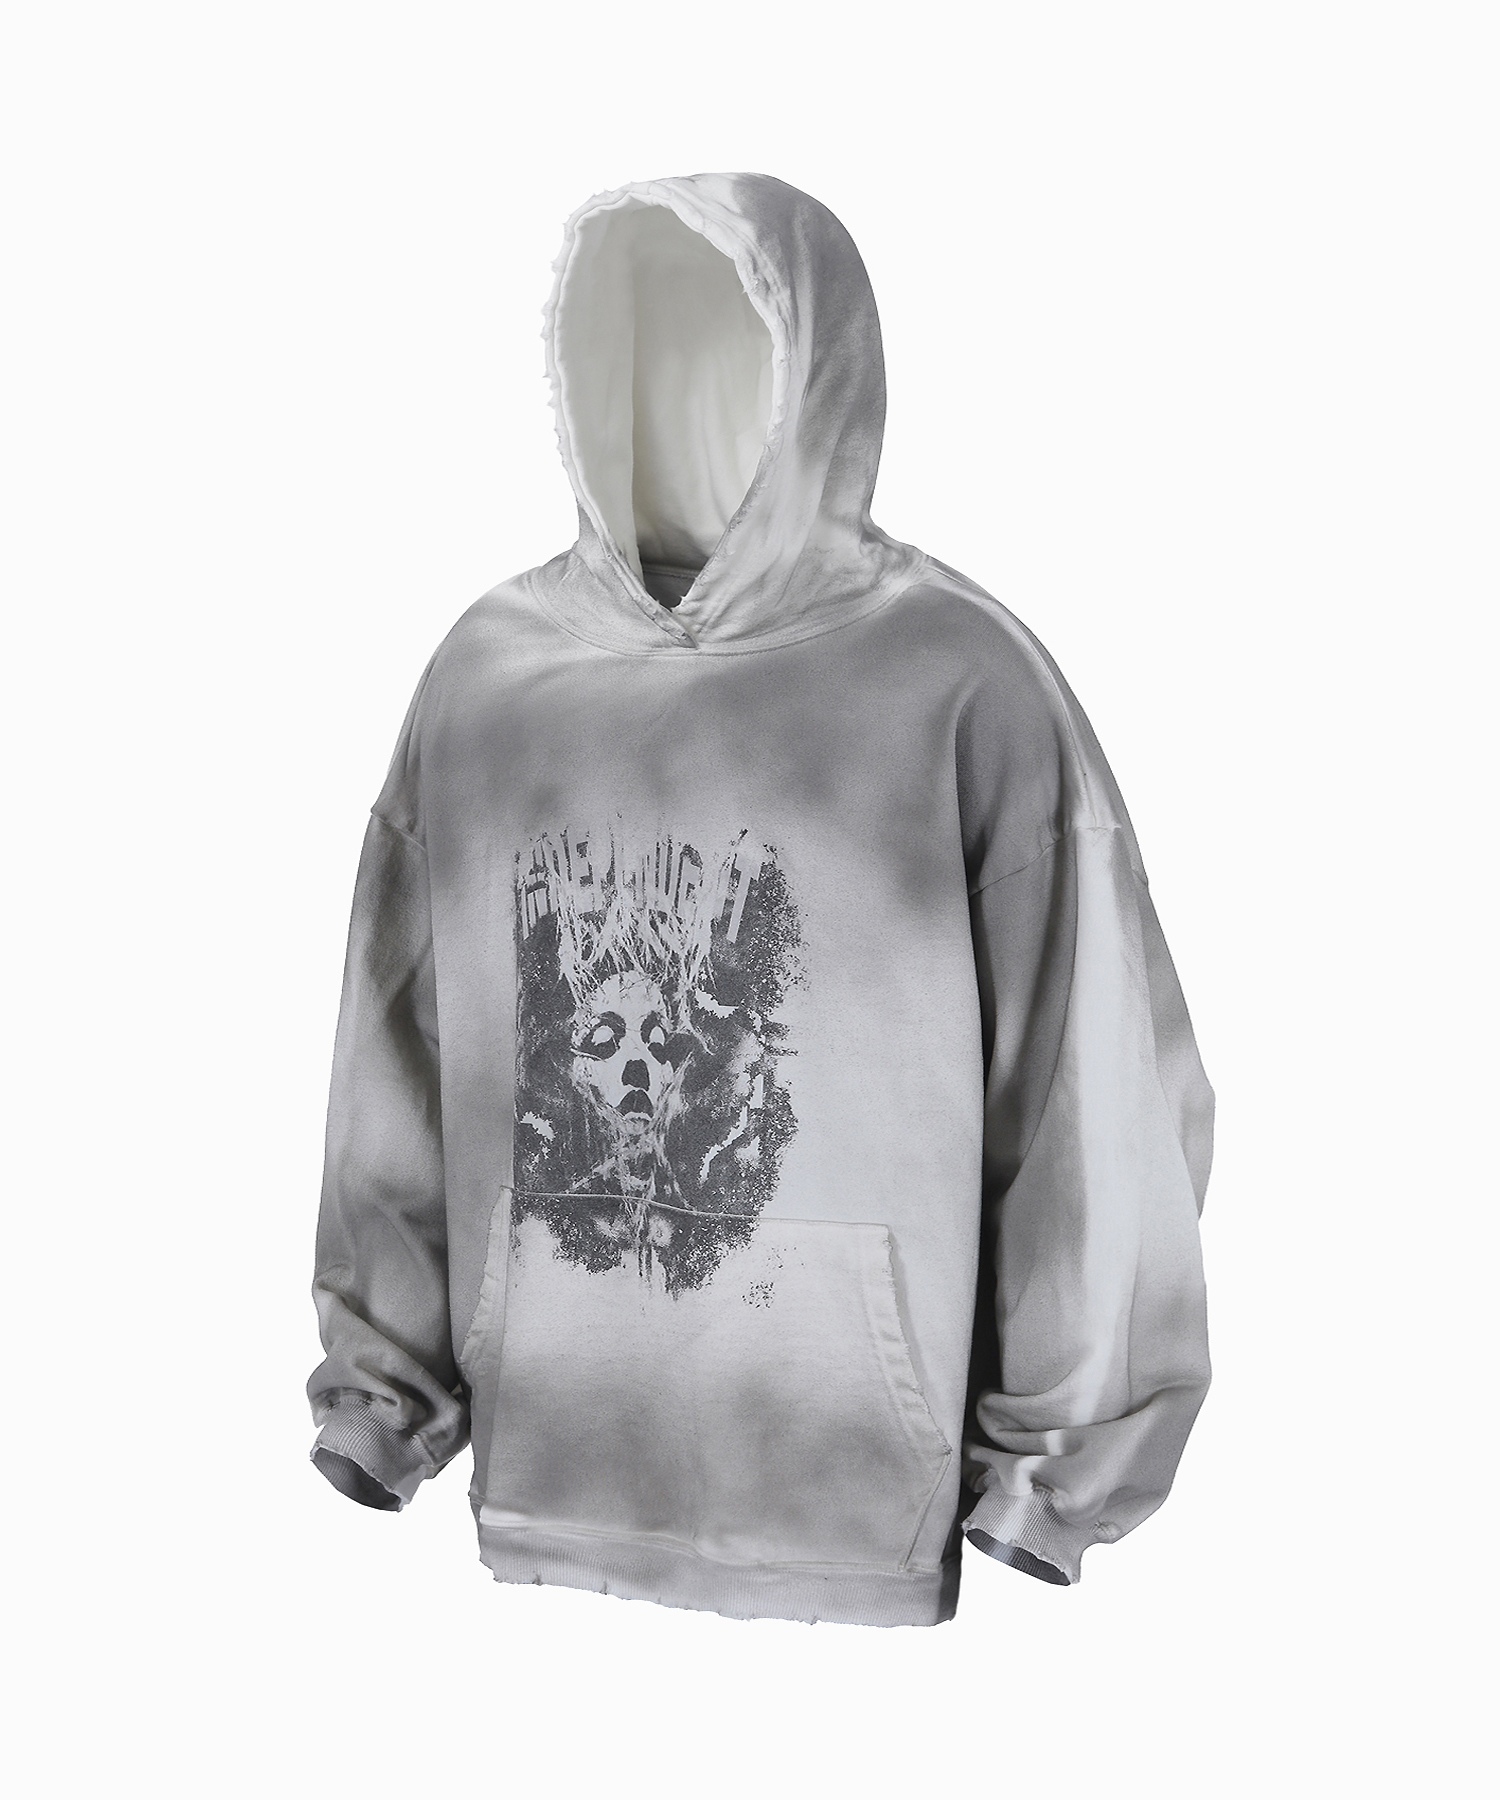 Independent washed hoodie-Dirty white - 로어링라드(ROARINGRAD)